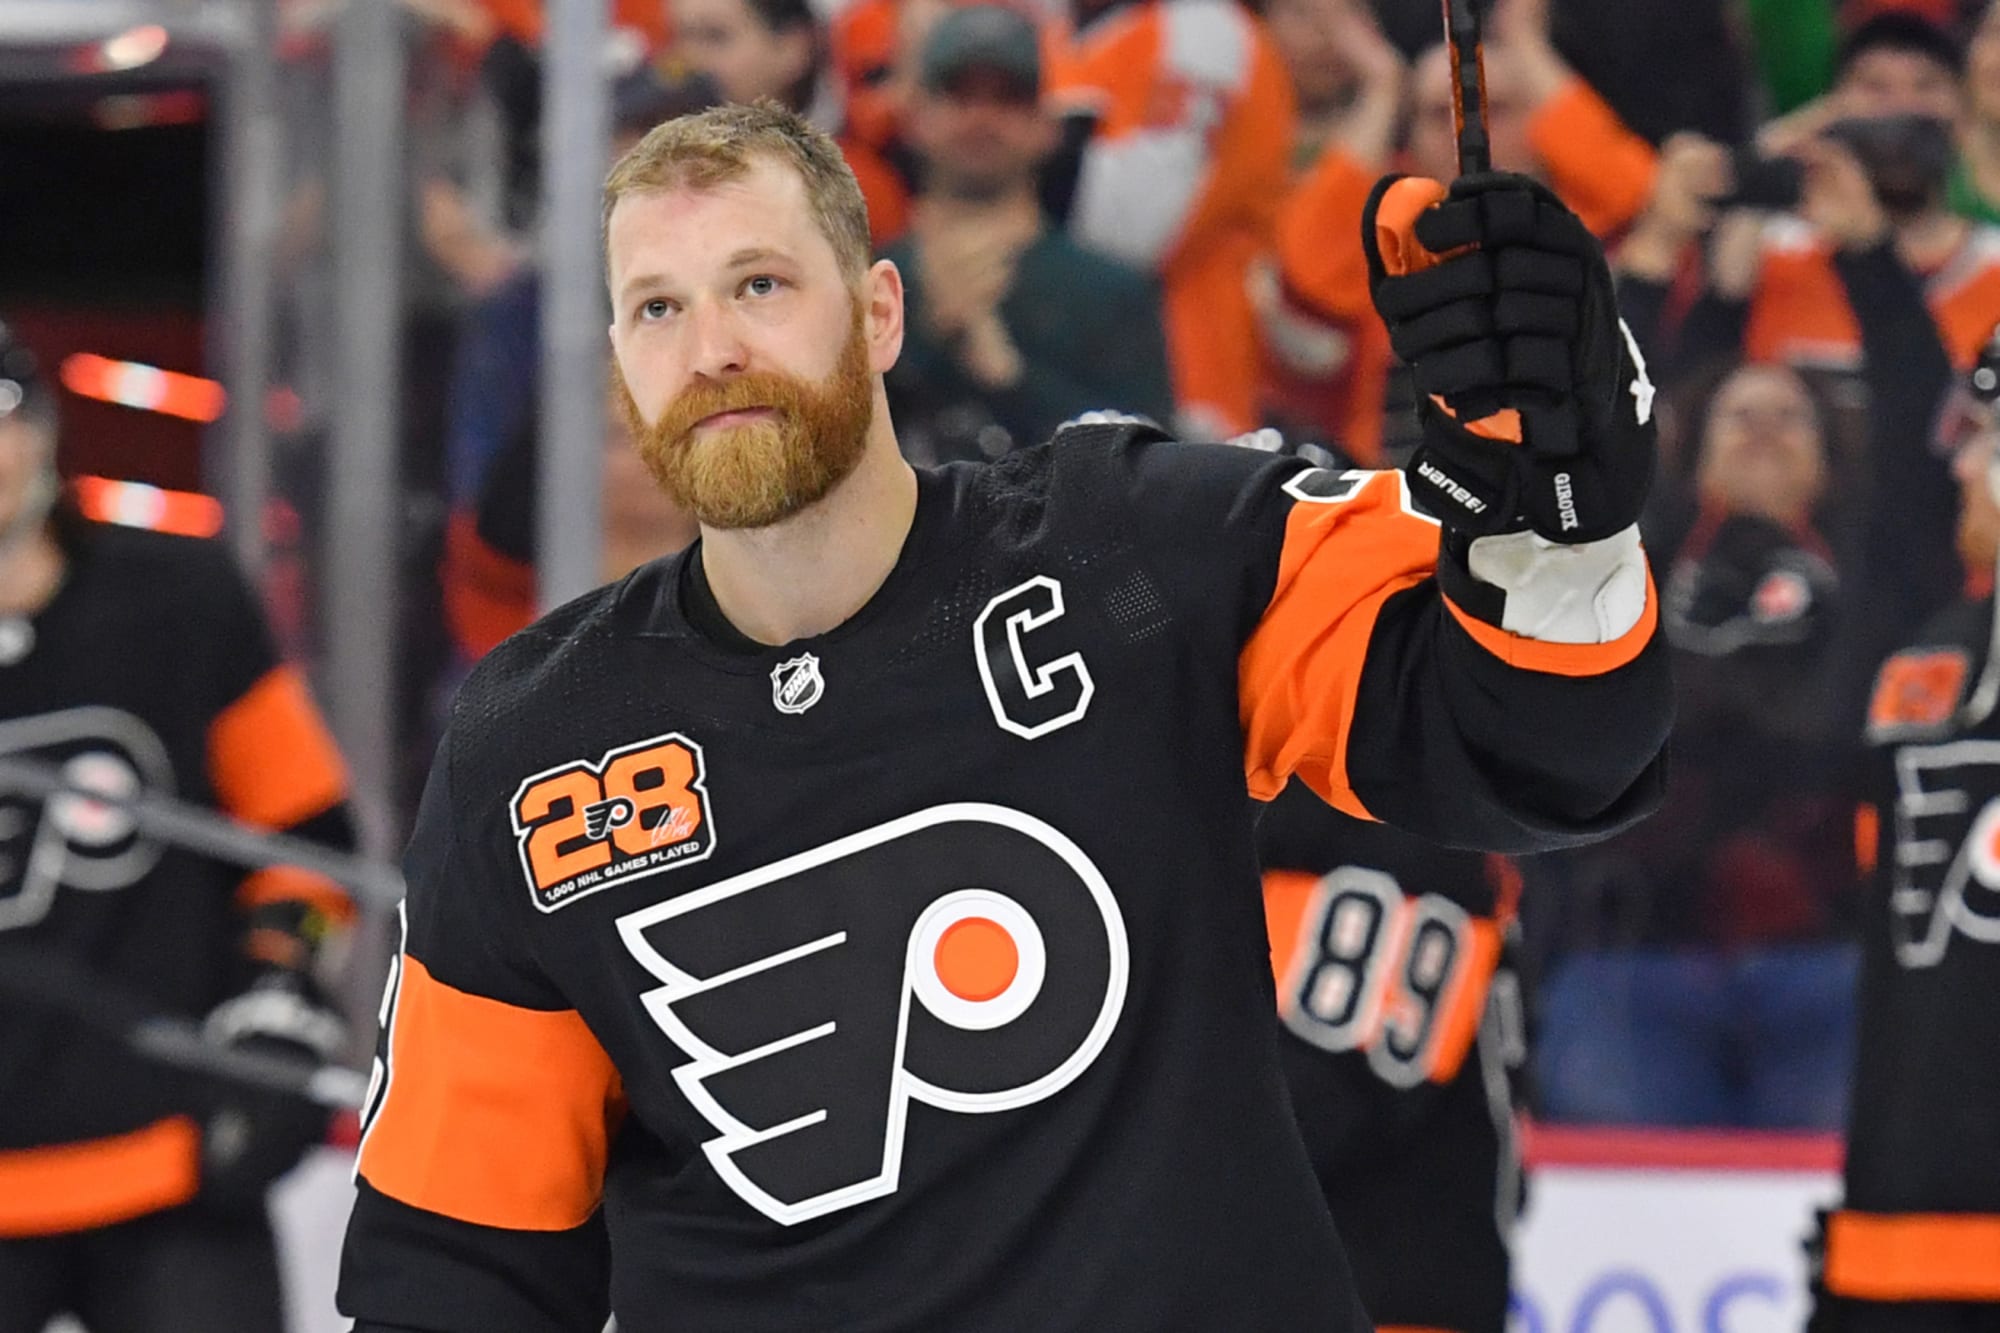 14 years ago Claude Giroux made his NHL Debut for the Flyers wearing #56 –  FLYERS NITTY GRITTY